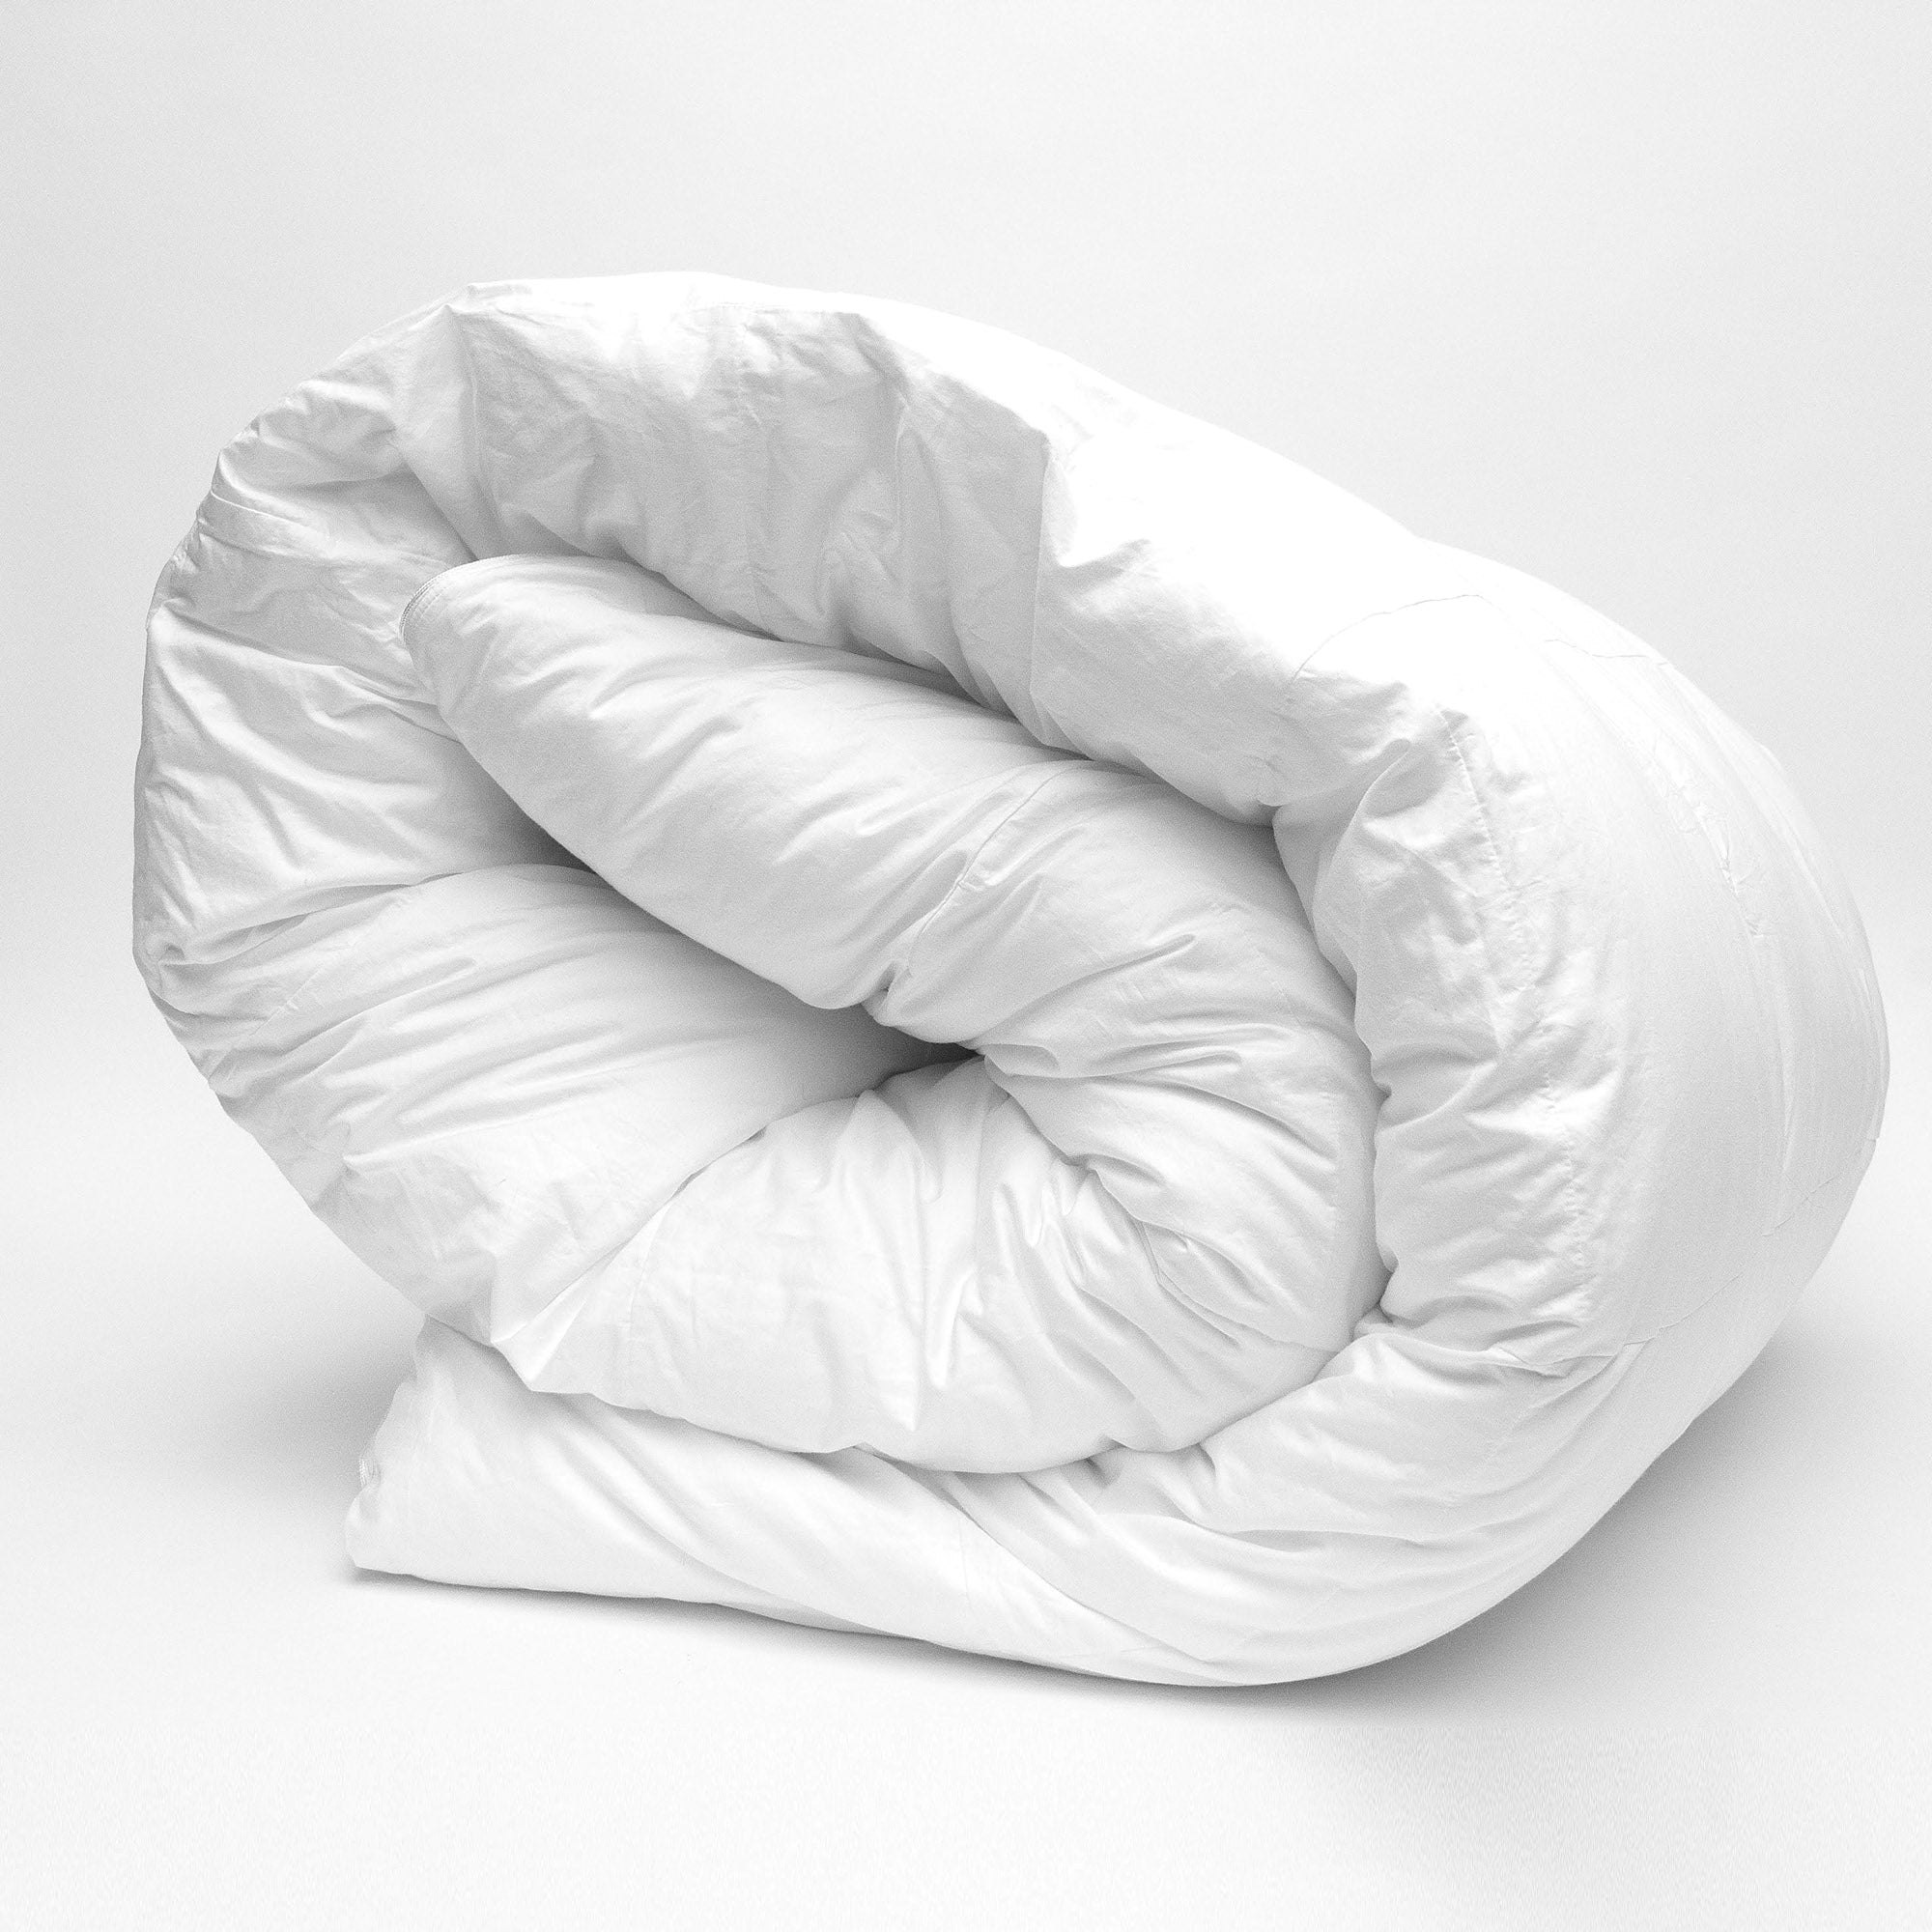 Rolled Up - Luxury Hypo-Allergenic Comforter - American Blanket Company